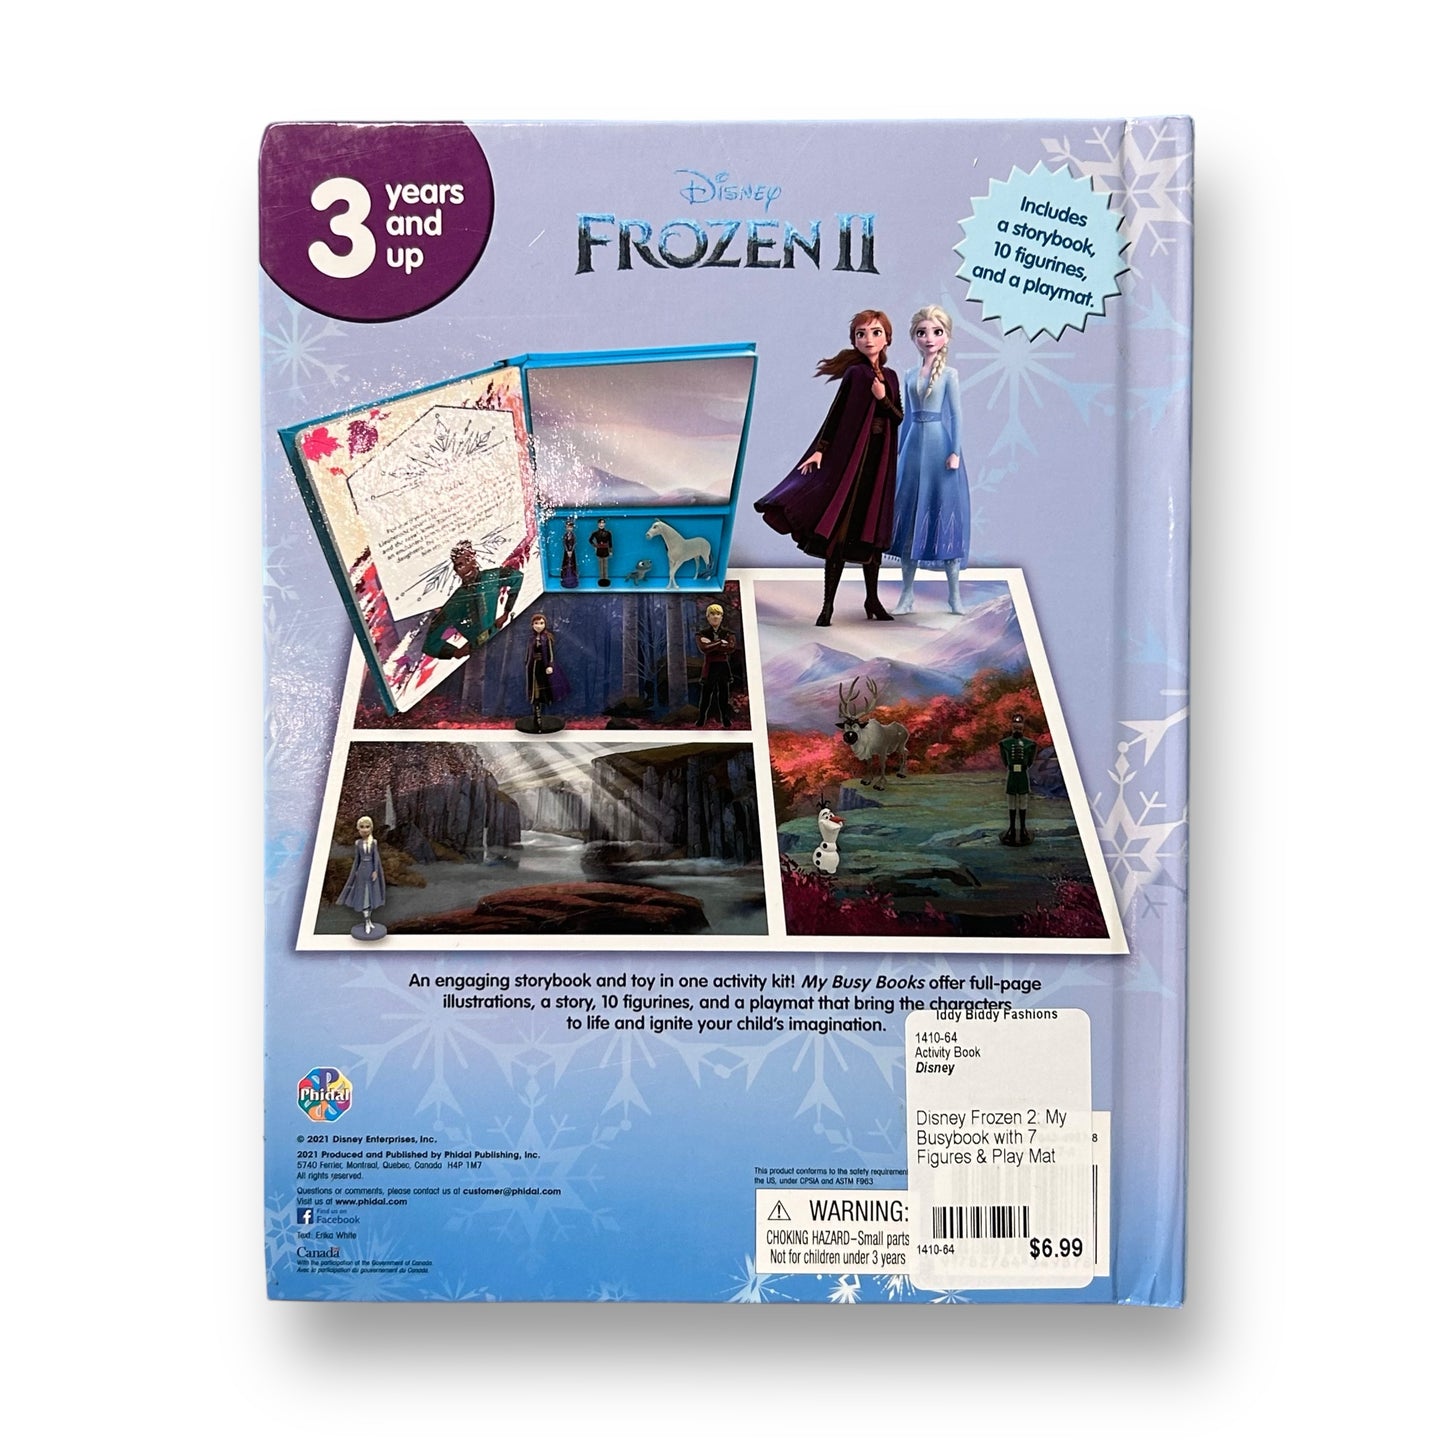 Disney Frozen 2: My Busybook with 7 Figures & Play Mat